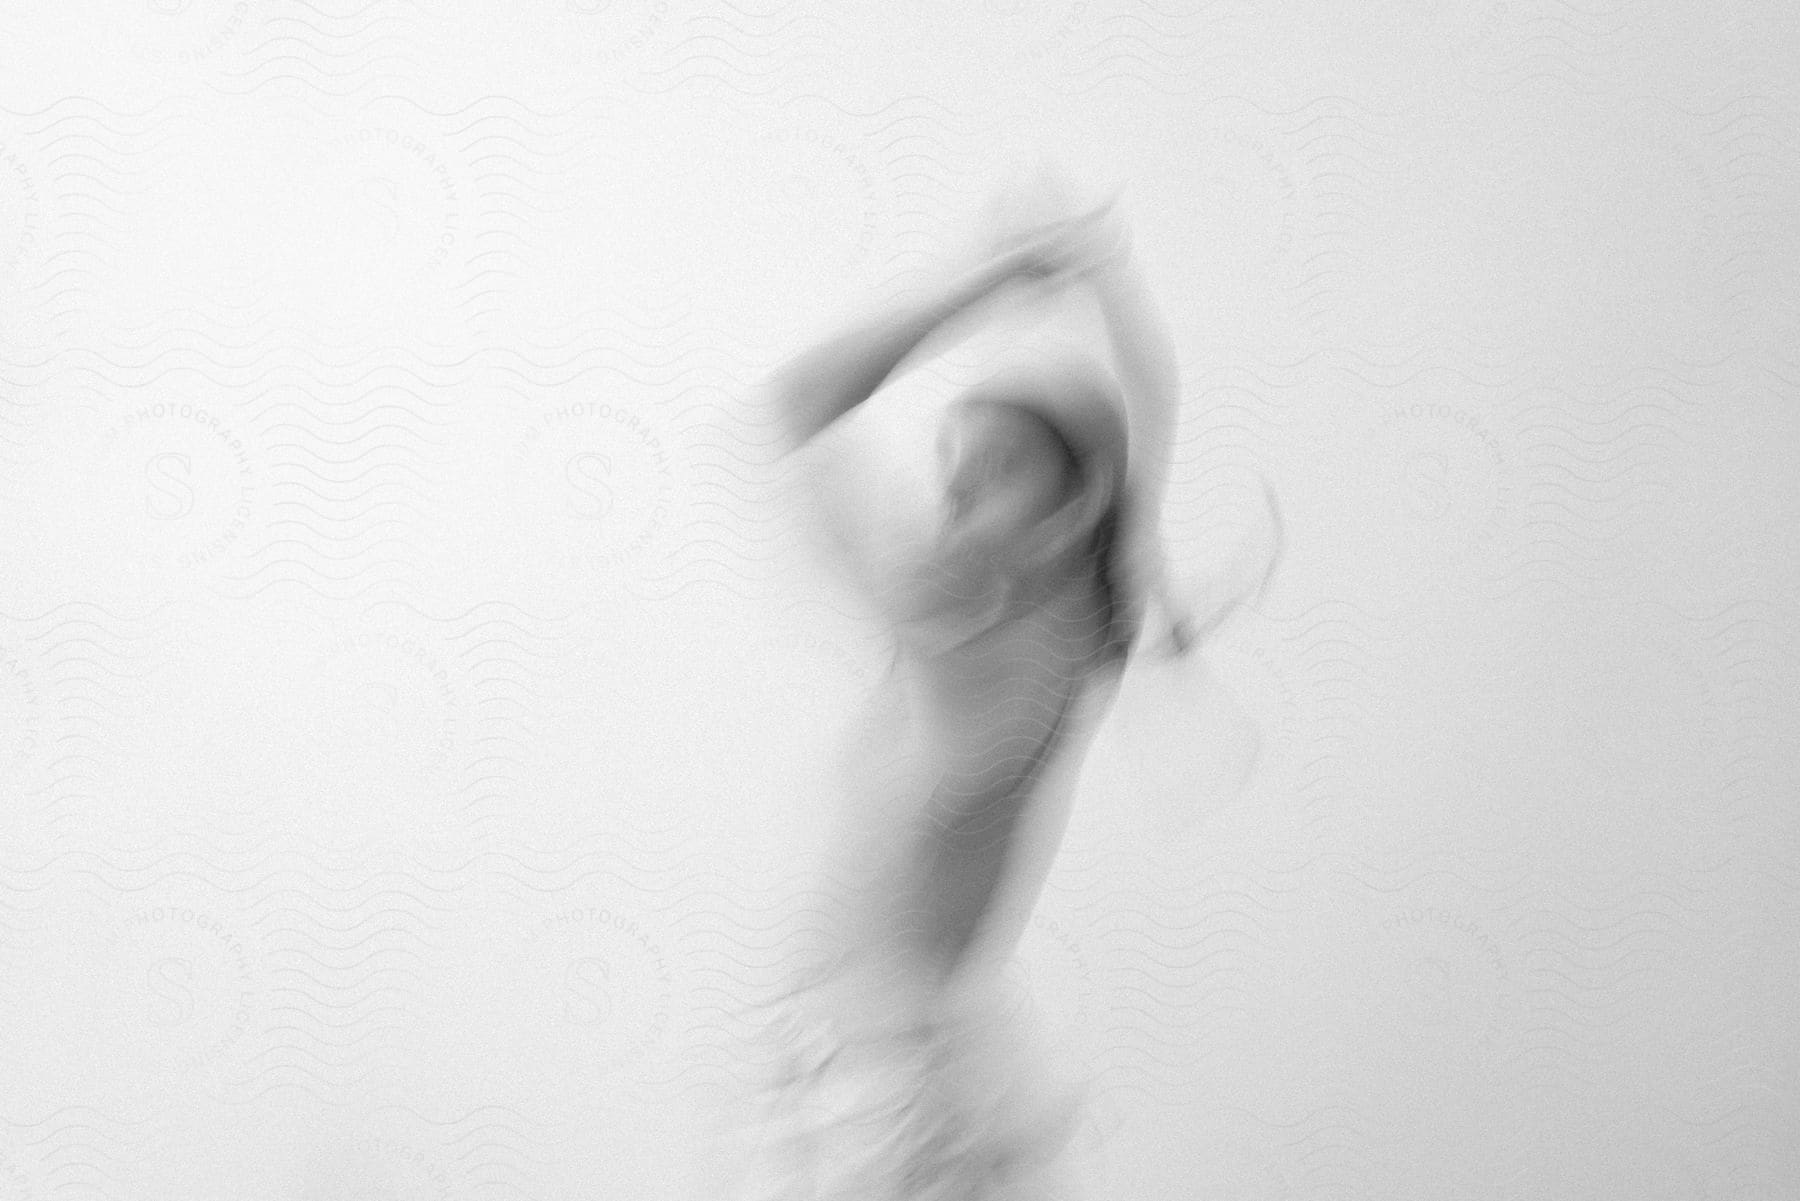 Stock photo of a woman dancing in a blurry image